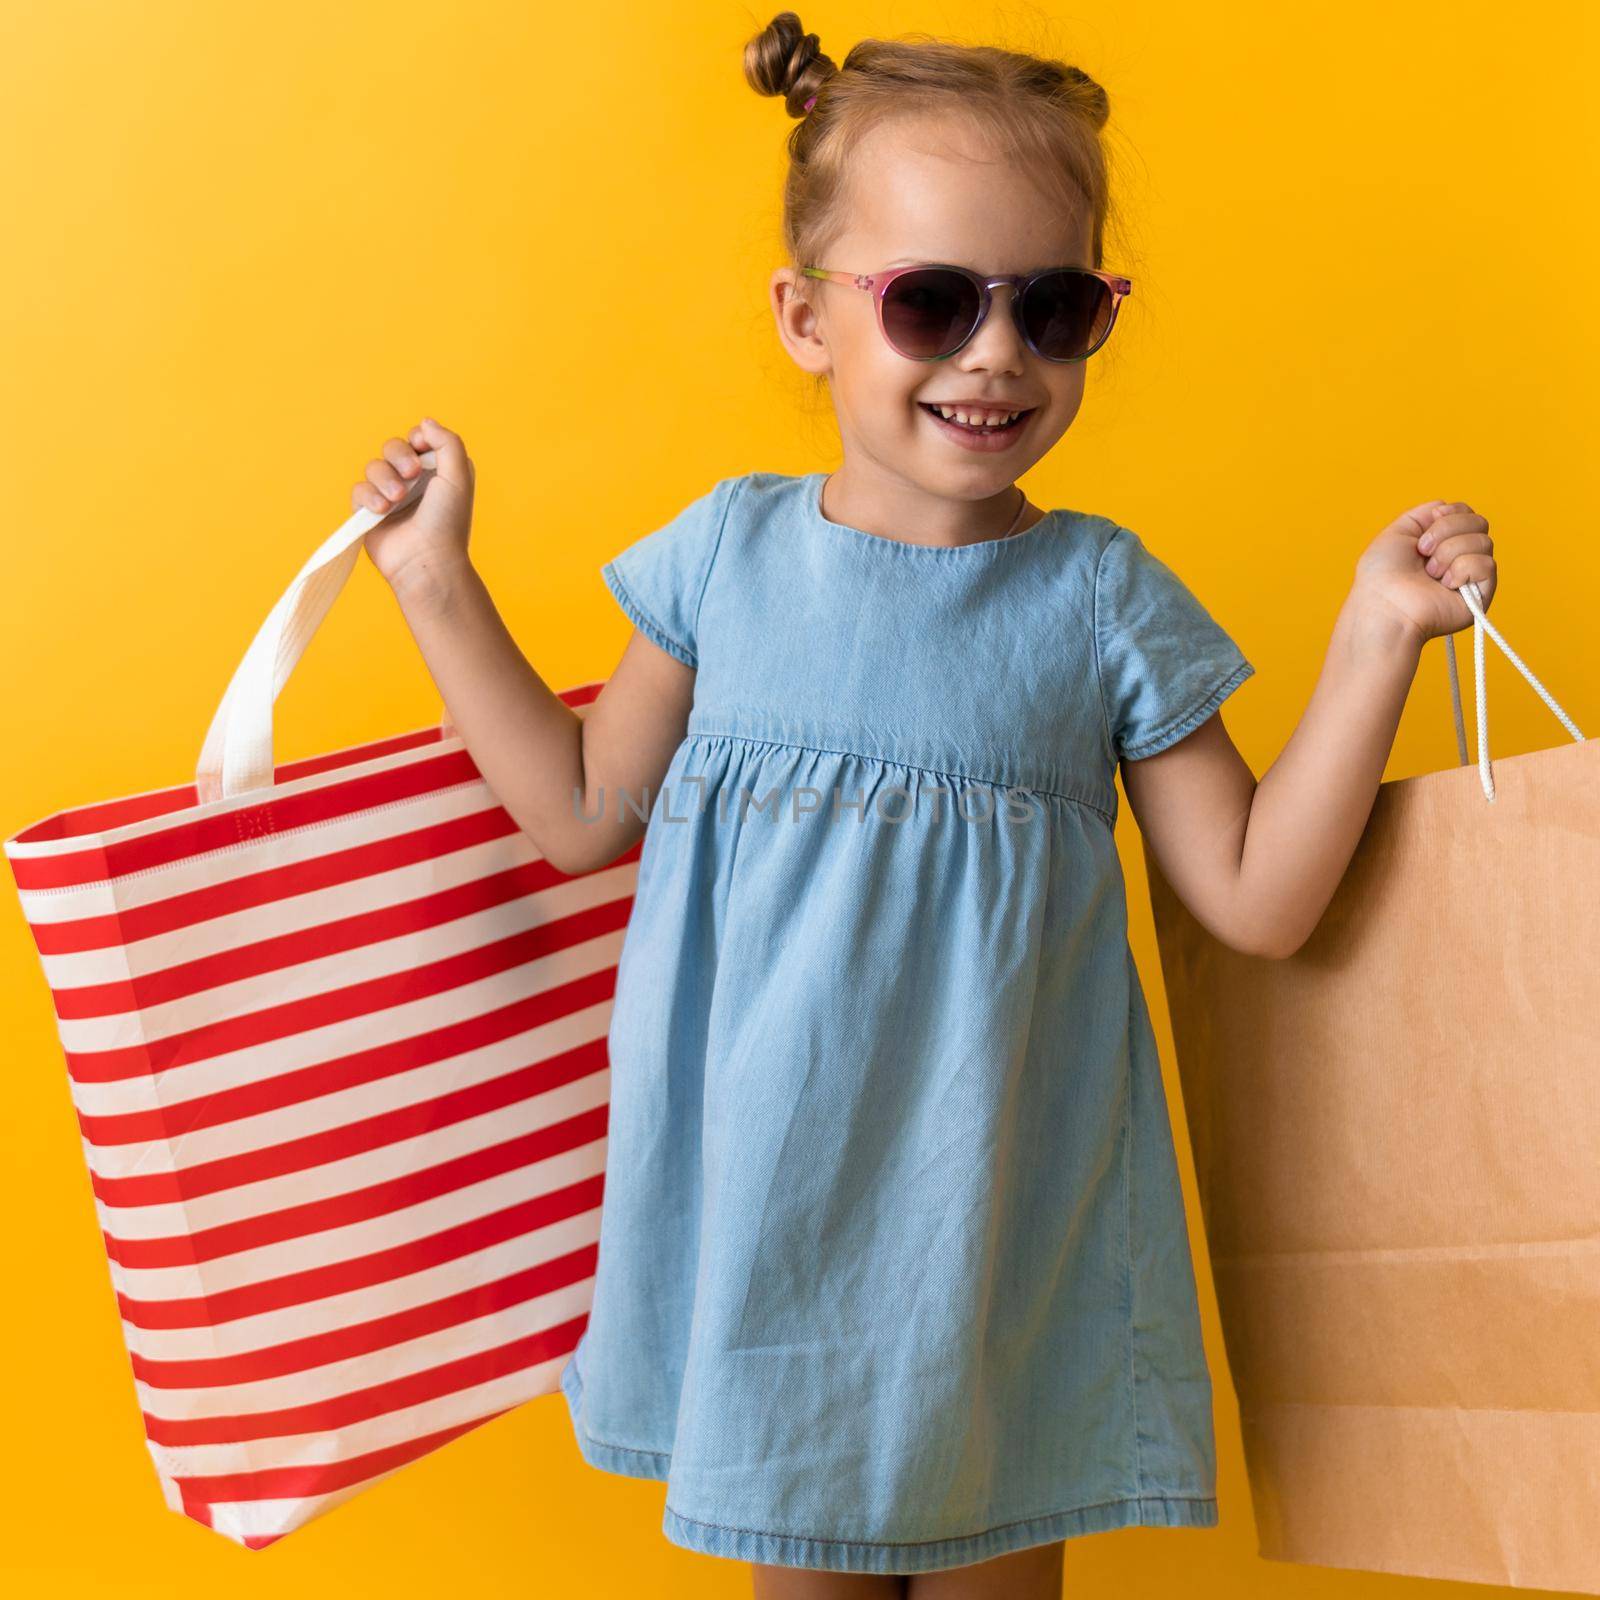 Square Portrait Beautiful Happy Little Preschool Girl In Sunglasses Smiling Cheerful Holding Cardboard Bags Isolated On Orange Yellow background. Happiness, Consumerism, Sale People shopping Concept.